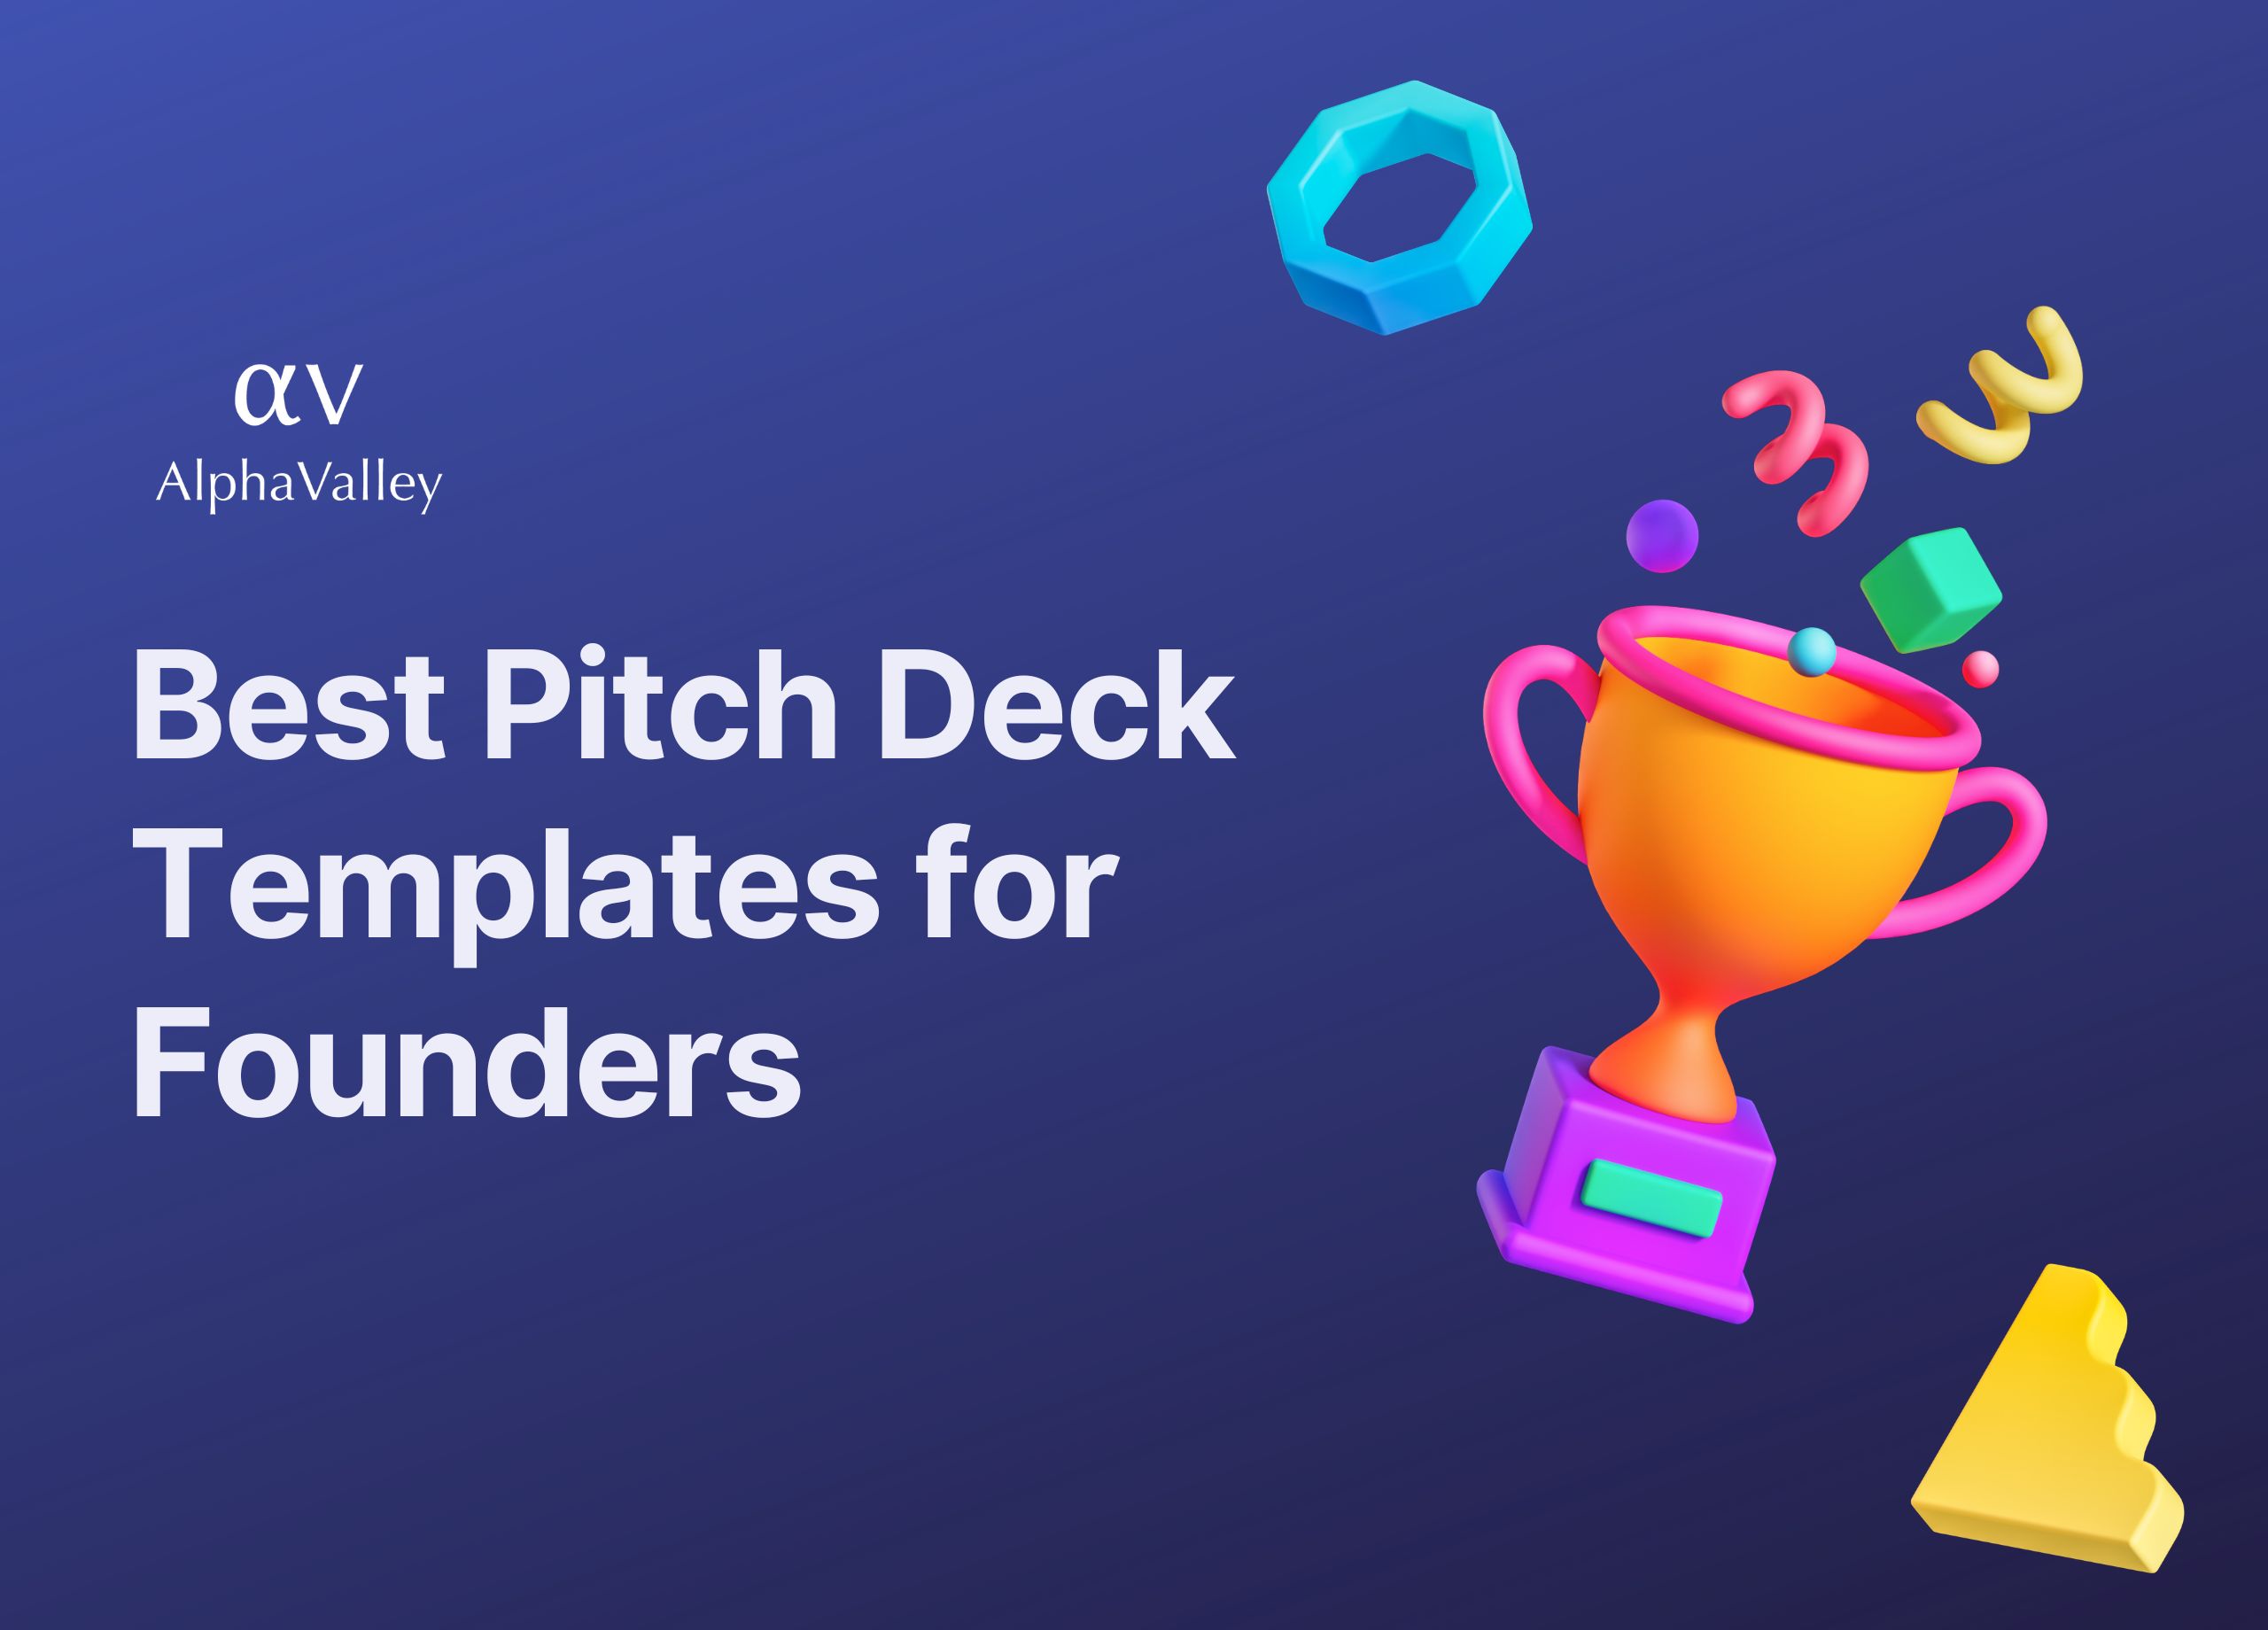 Top 10 free Pitch Deck templates for Founders